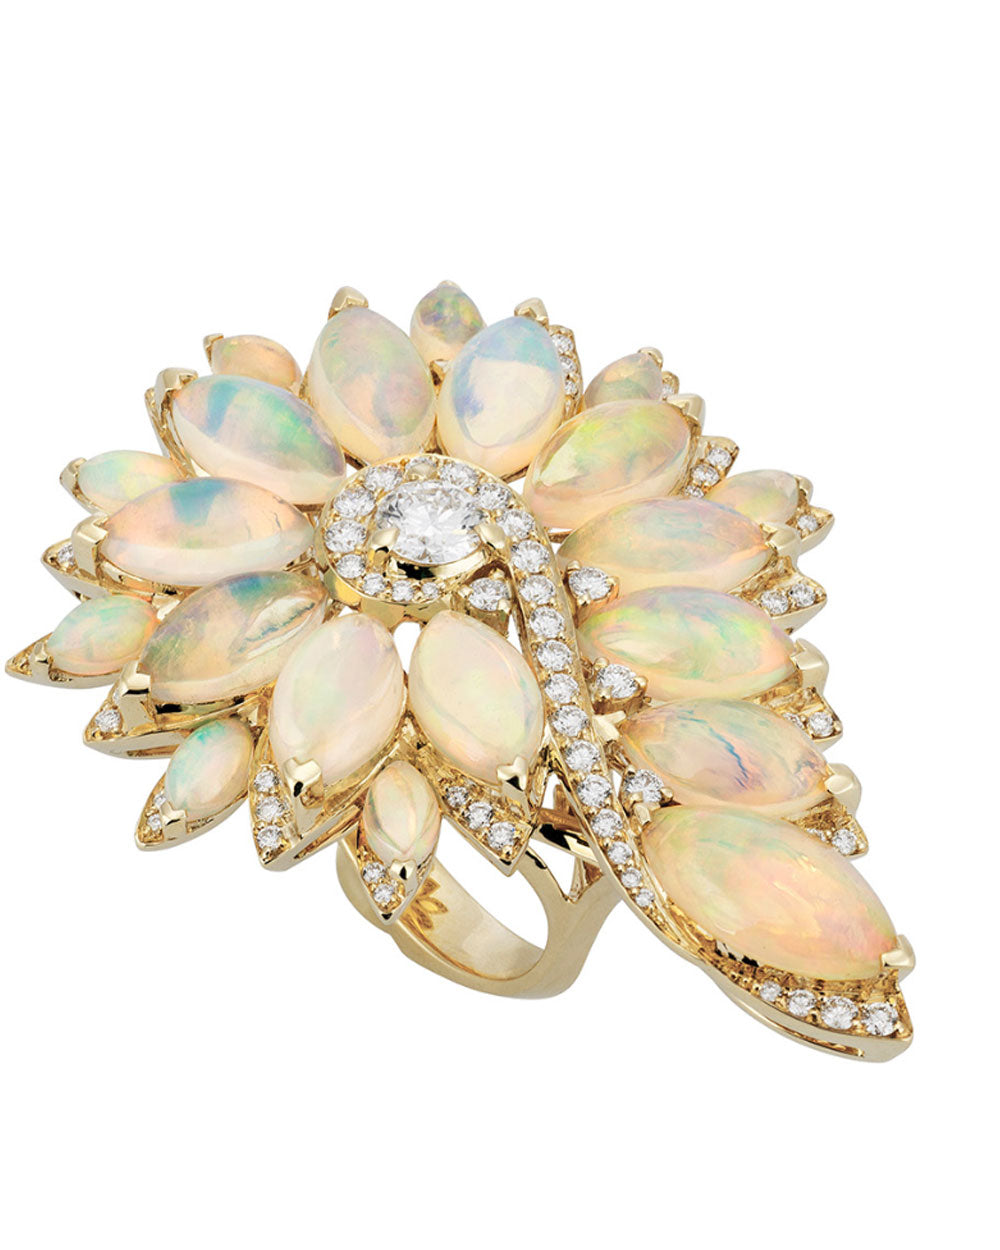 White Opal and Diamond Magnipheasant Feathers Cocktail Ring